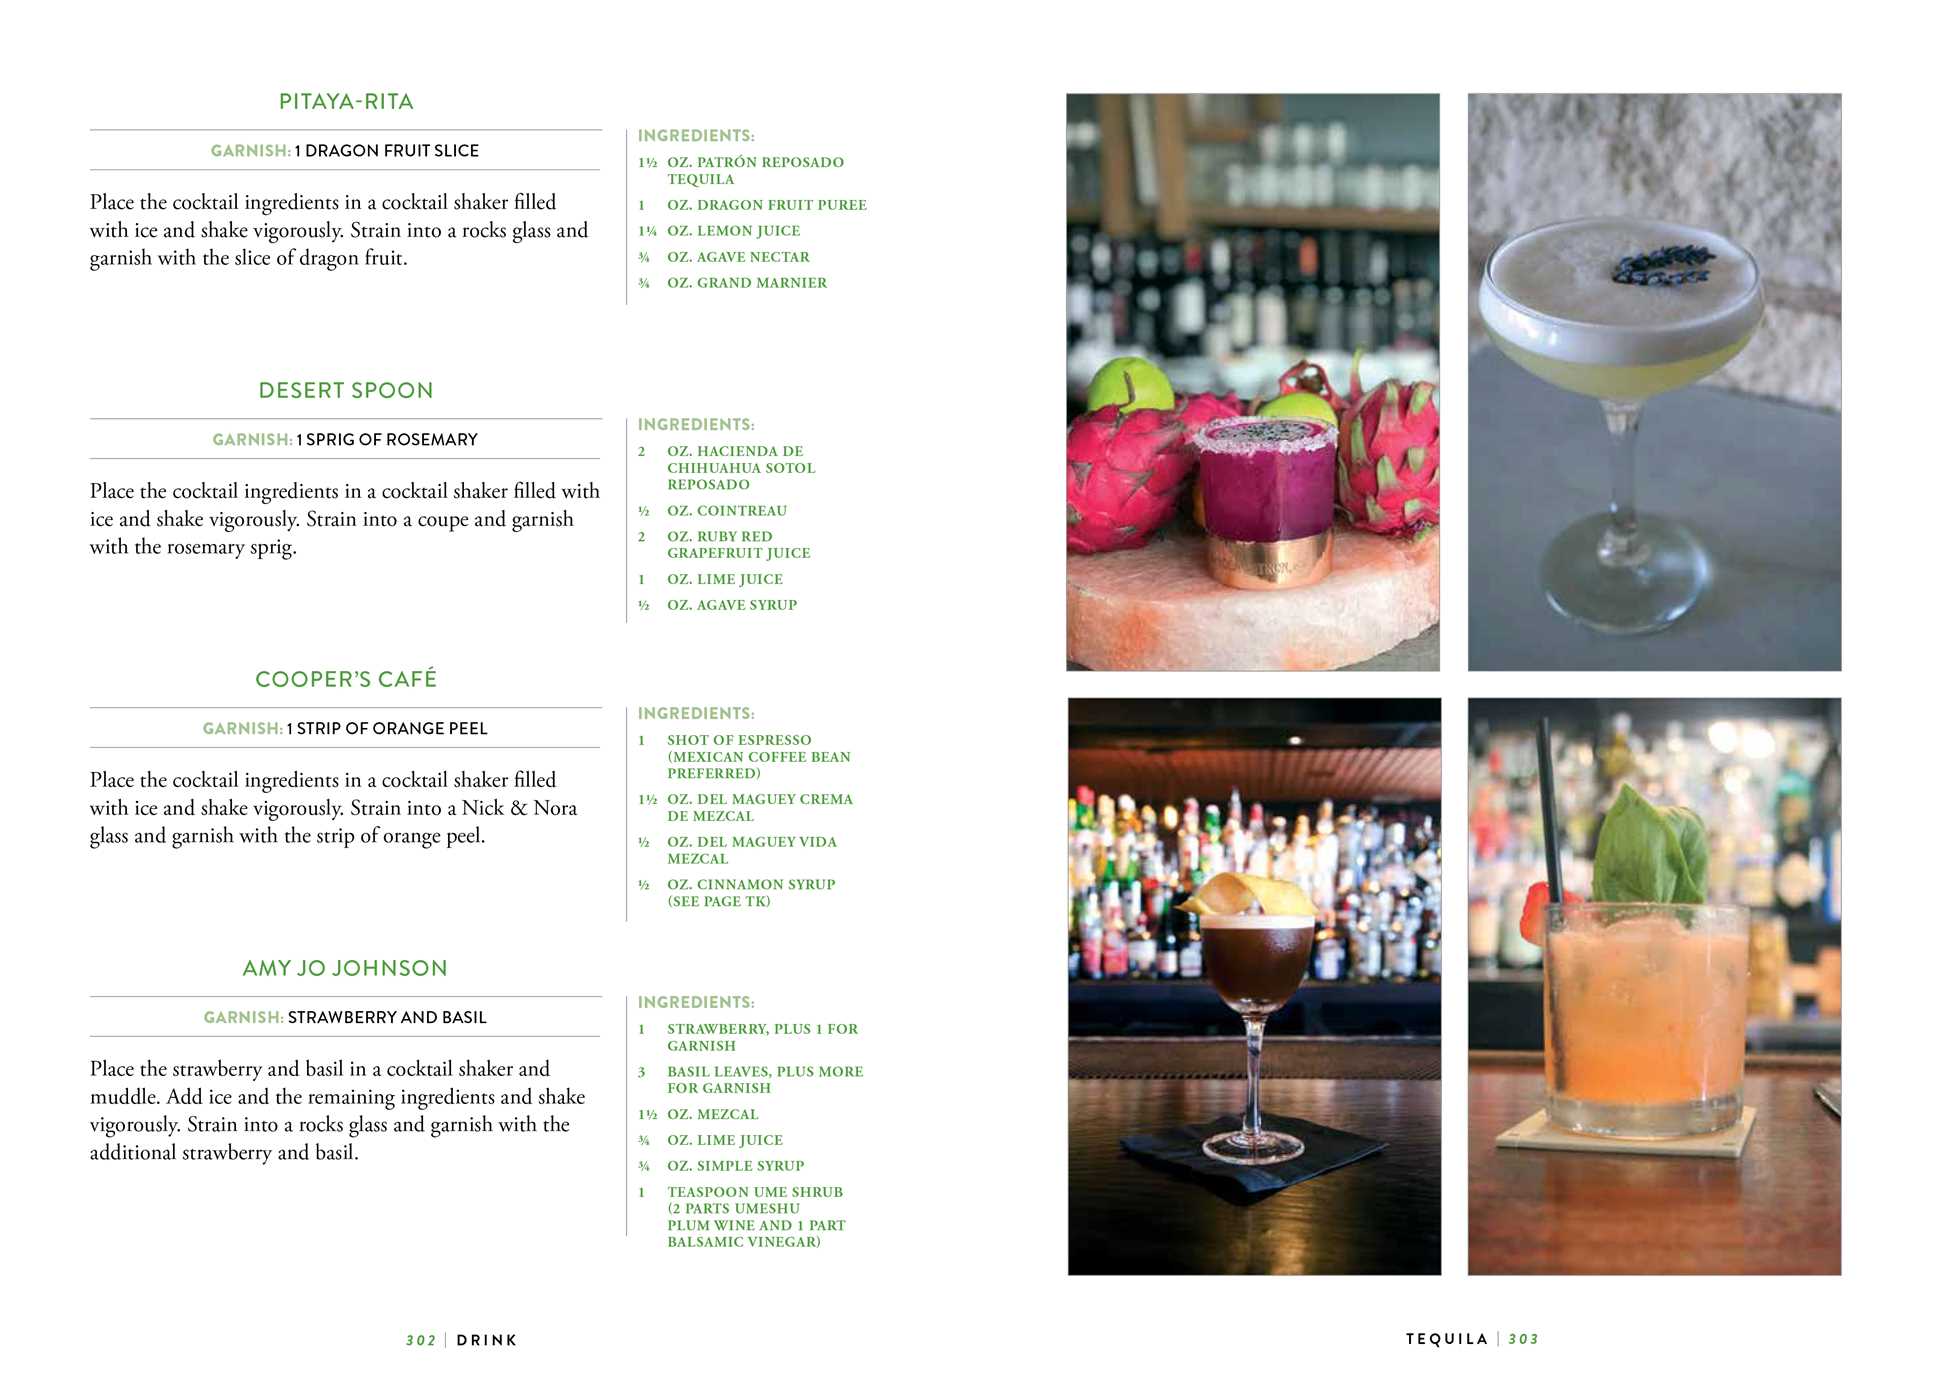 VINTAGE COCKTAILS & MIXOLOGY - 44 OLD COCKTAIL RECIPE BOOKS ON USB - LIQUOR  GIN